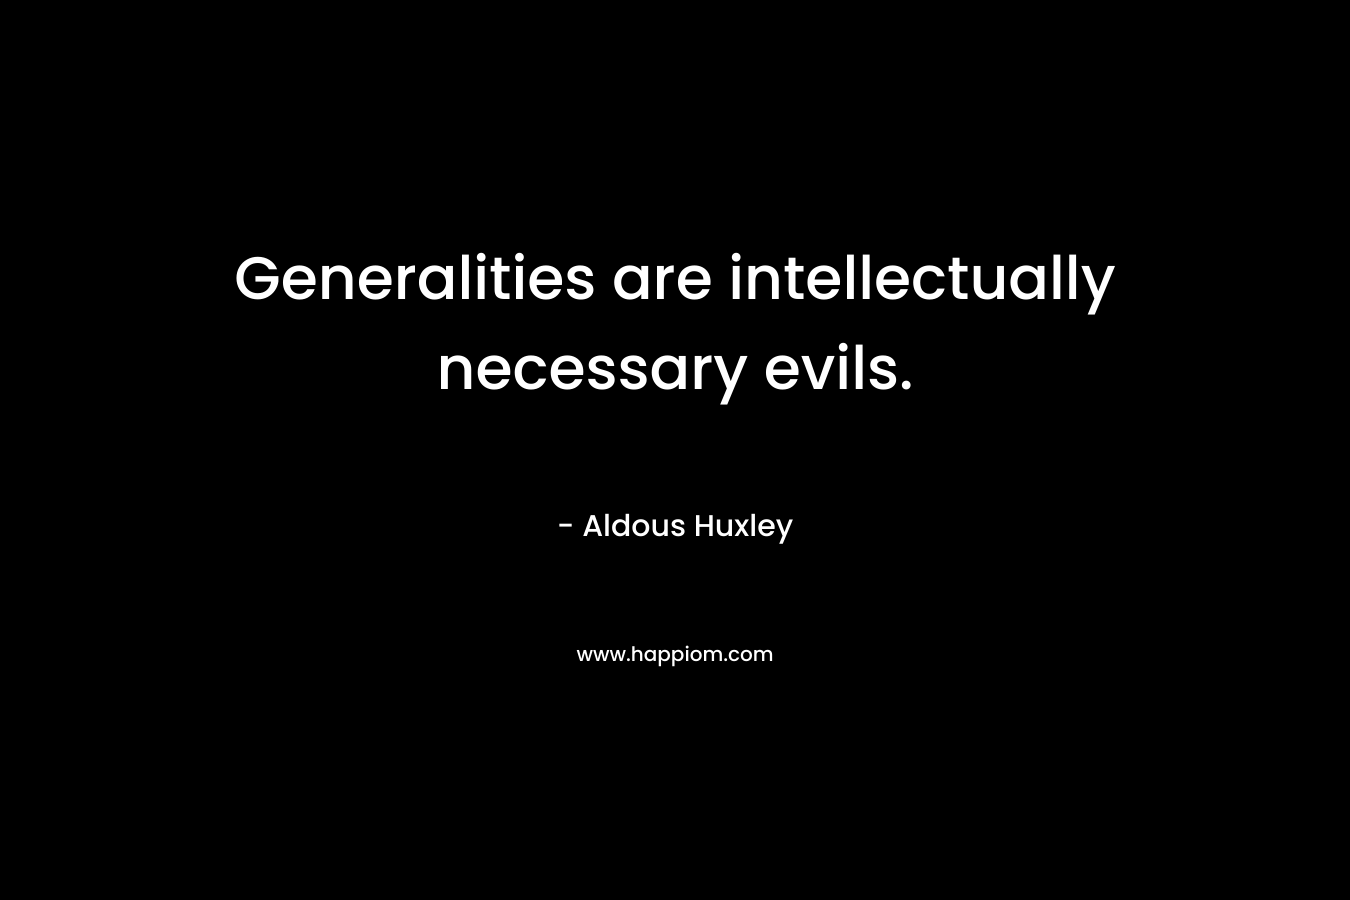 Generalities are intellectually necessary evils. – Aldous Huxley